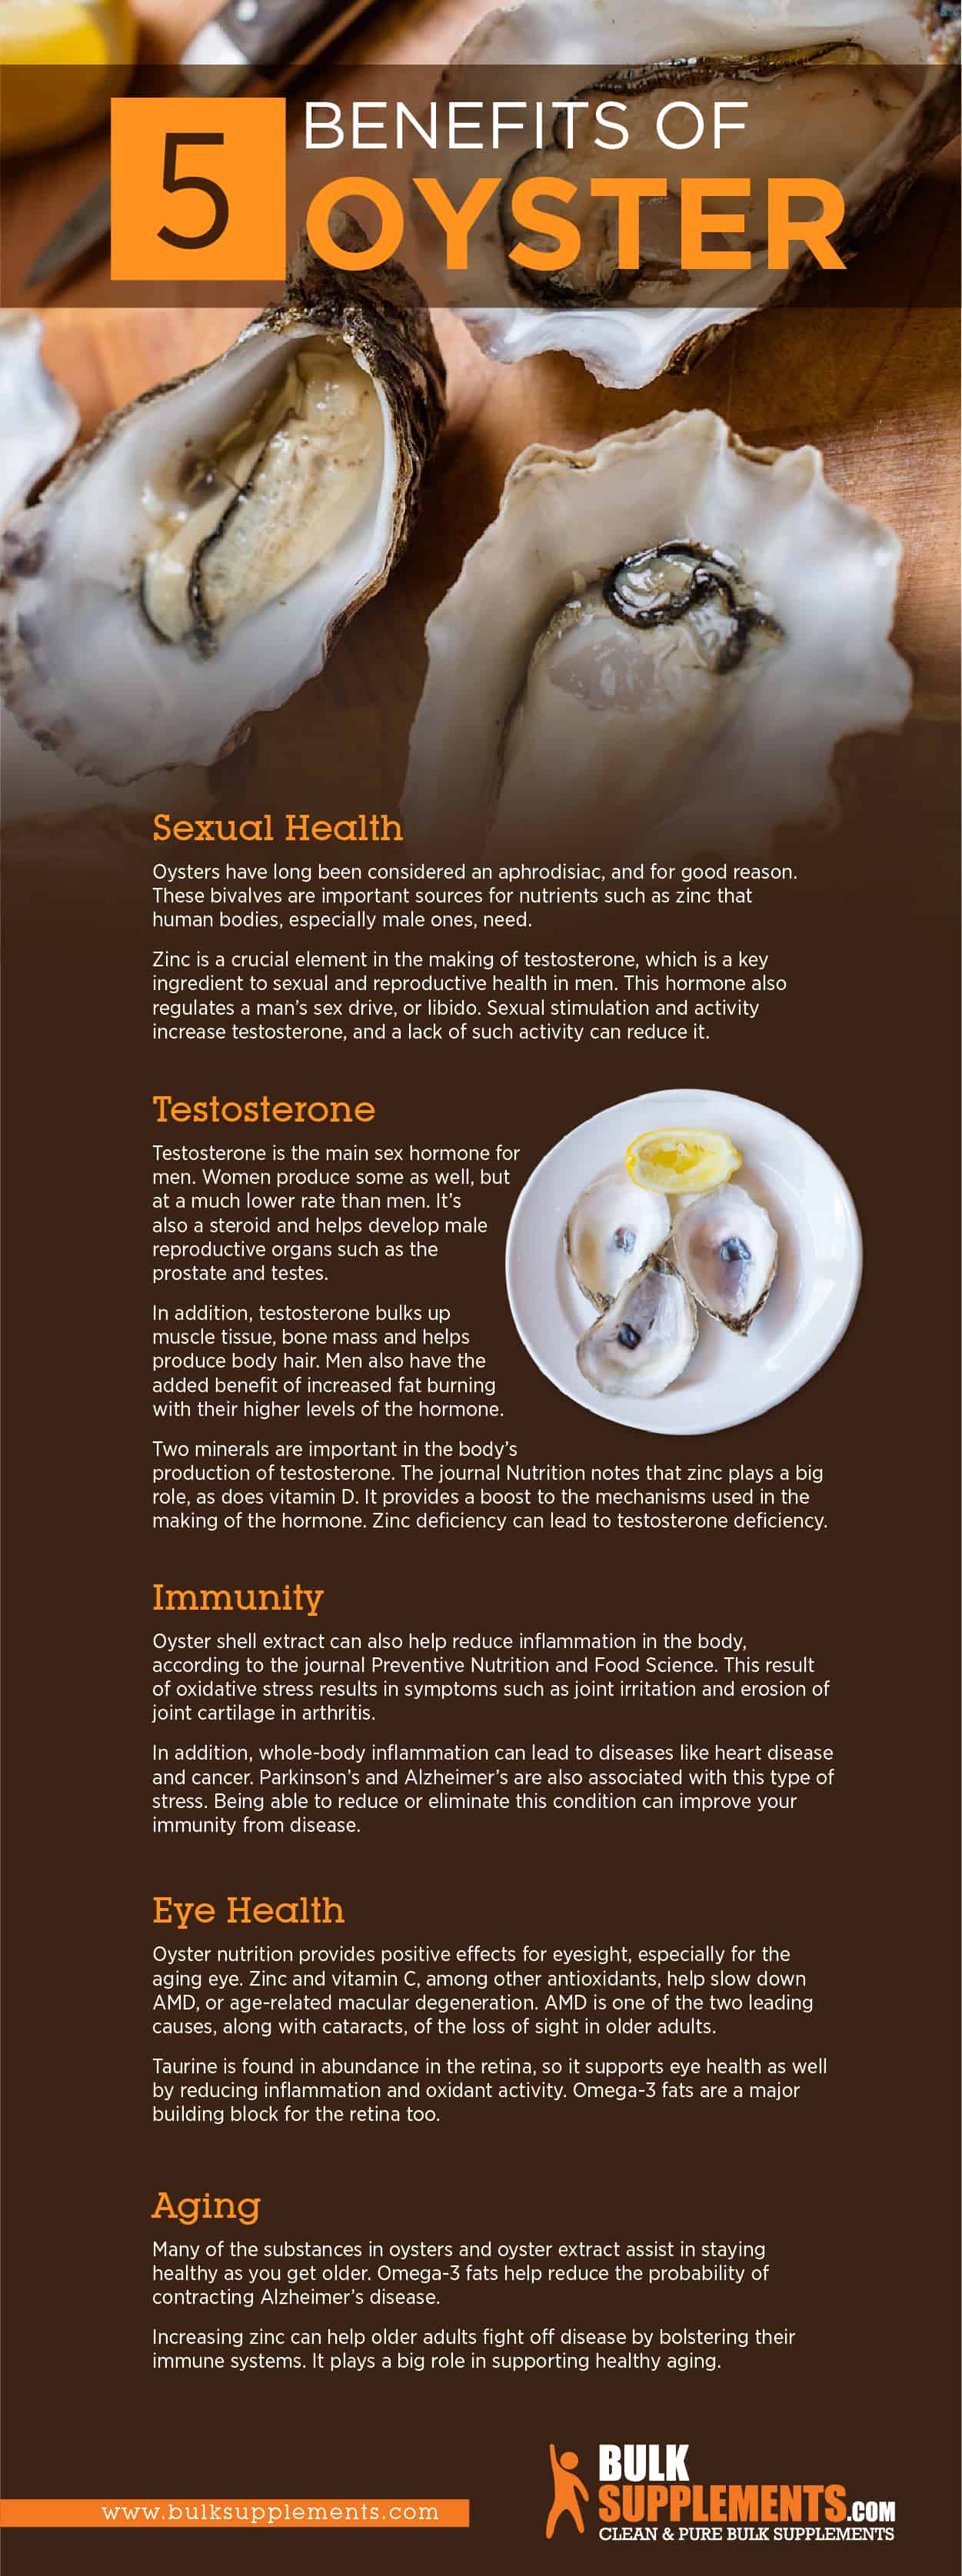 Are Oysters an Aphrodisiac